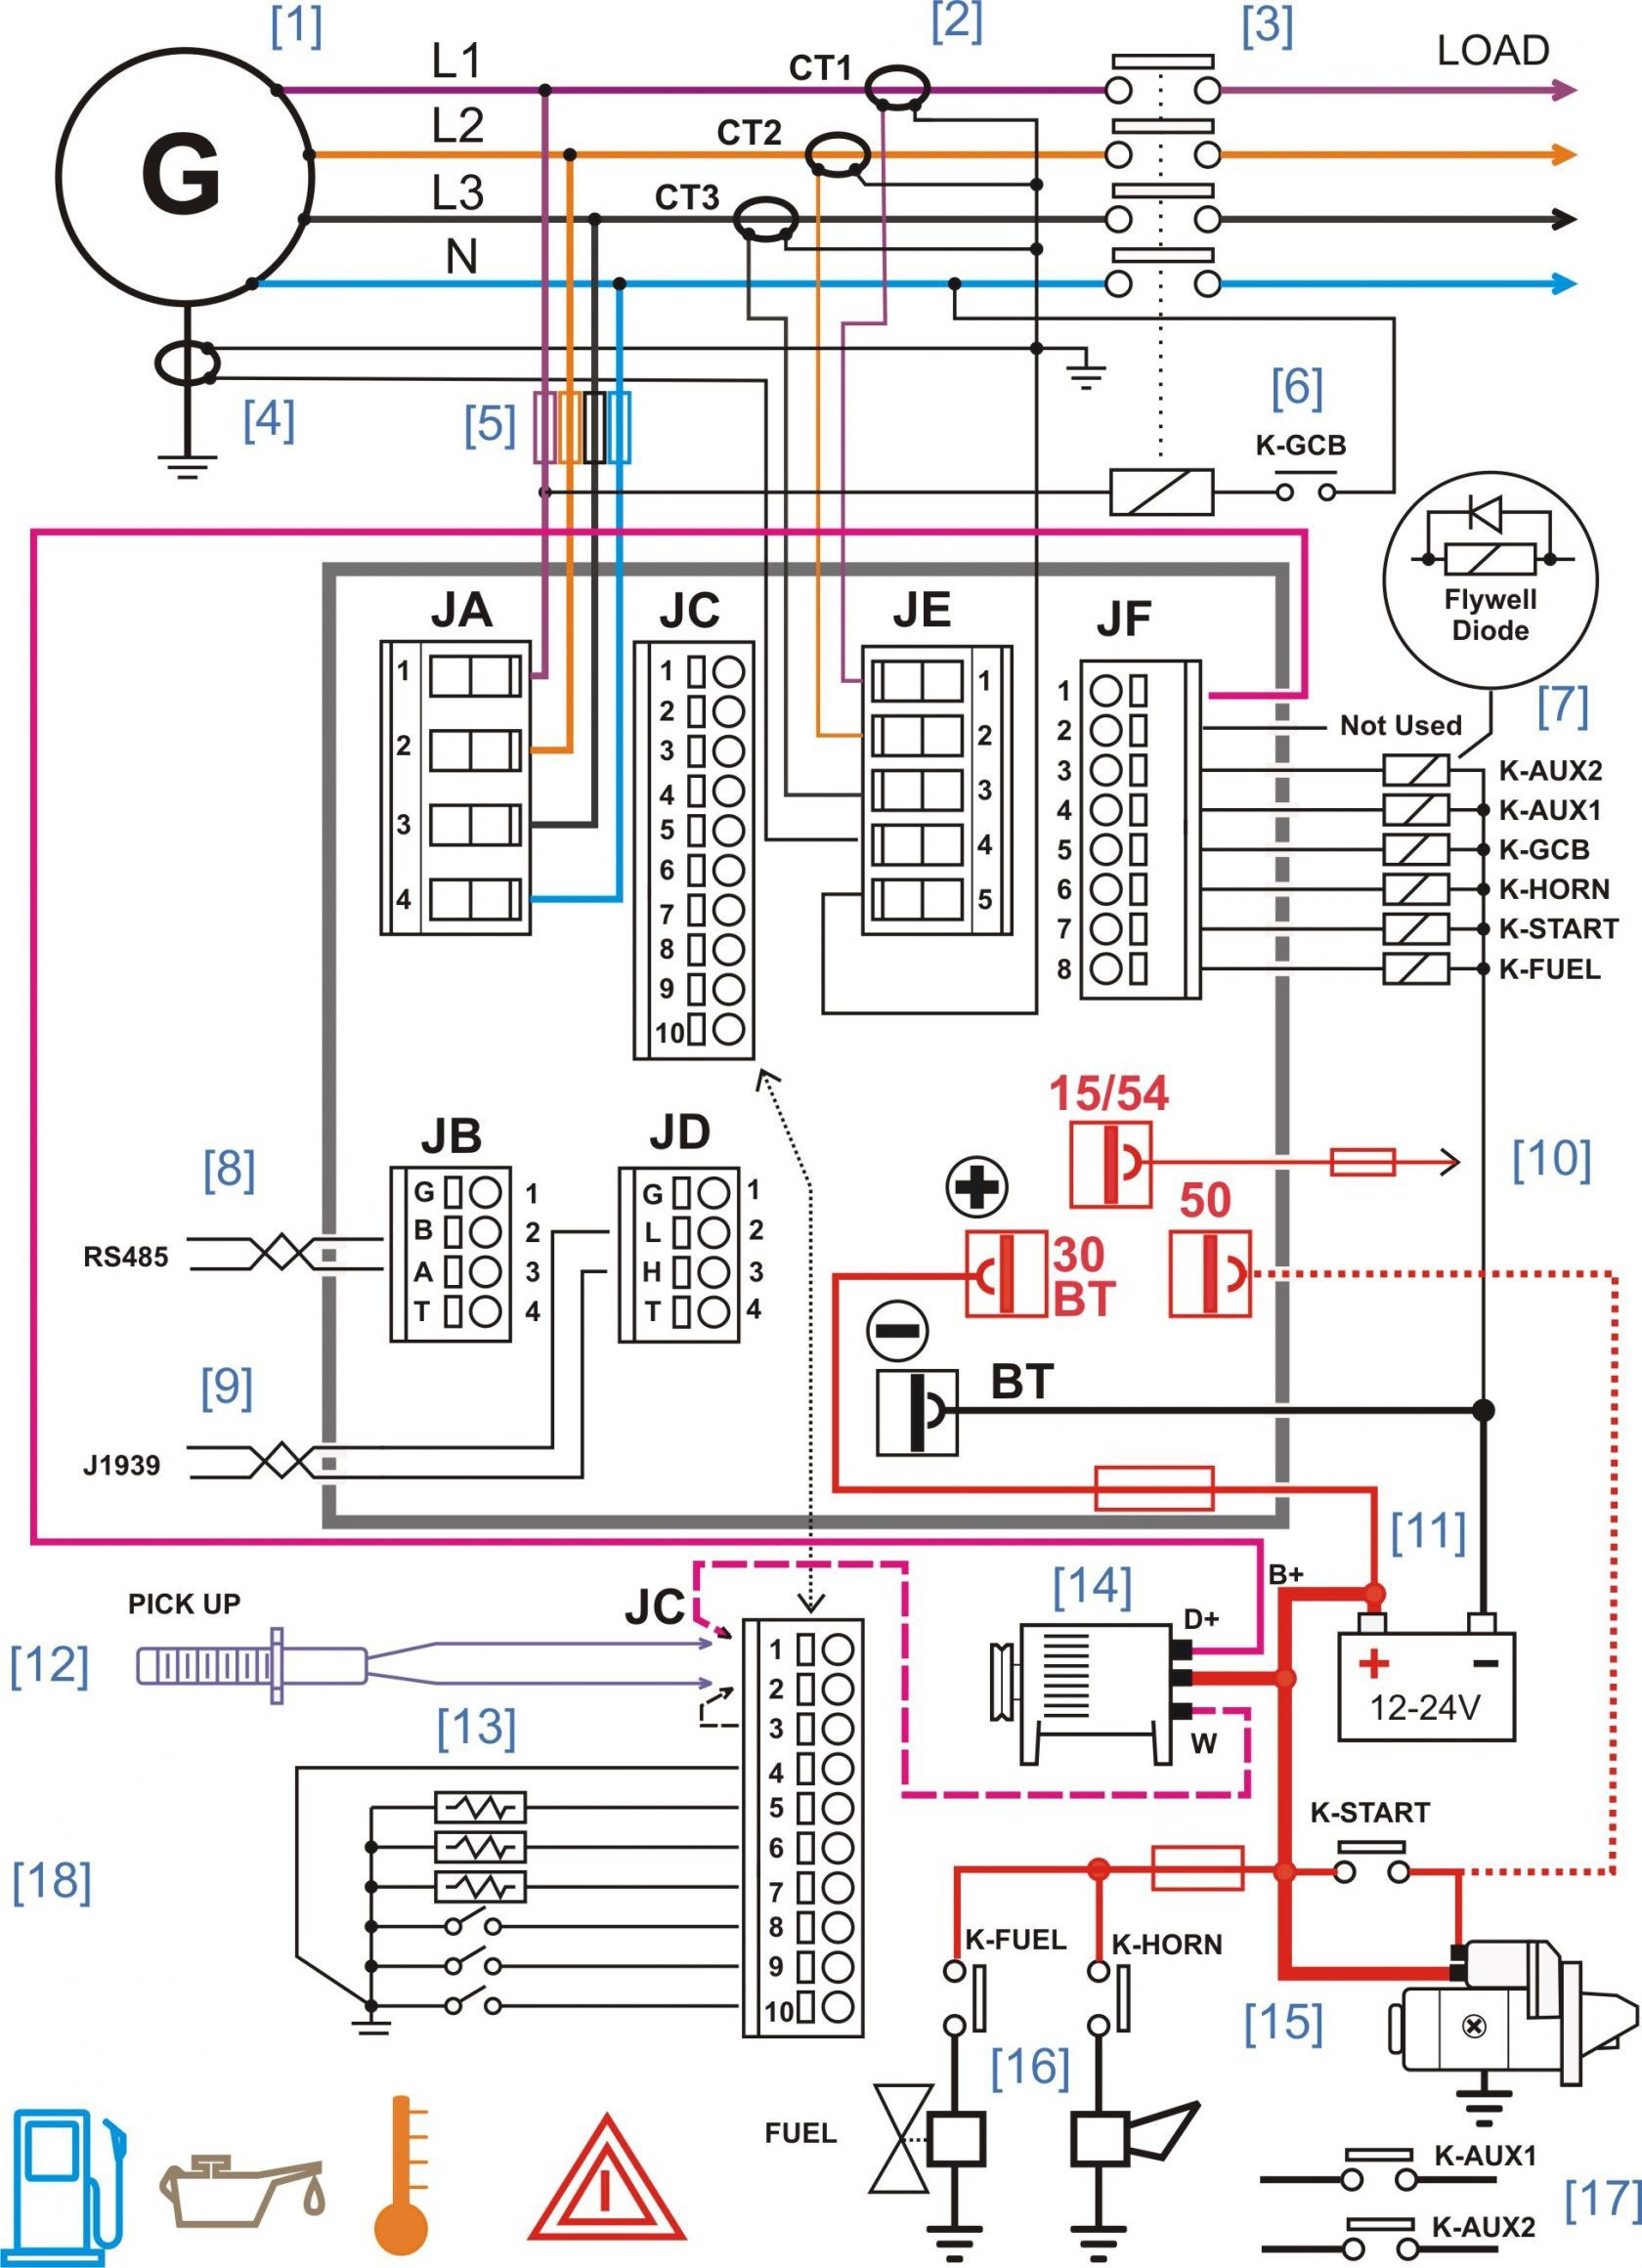 Junction Box Wiring Diagram New Electrical Wiring Diagrams for Dummies Wiring Diagram